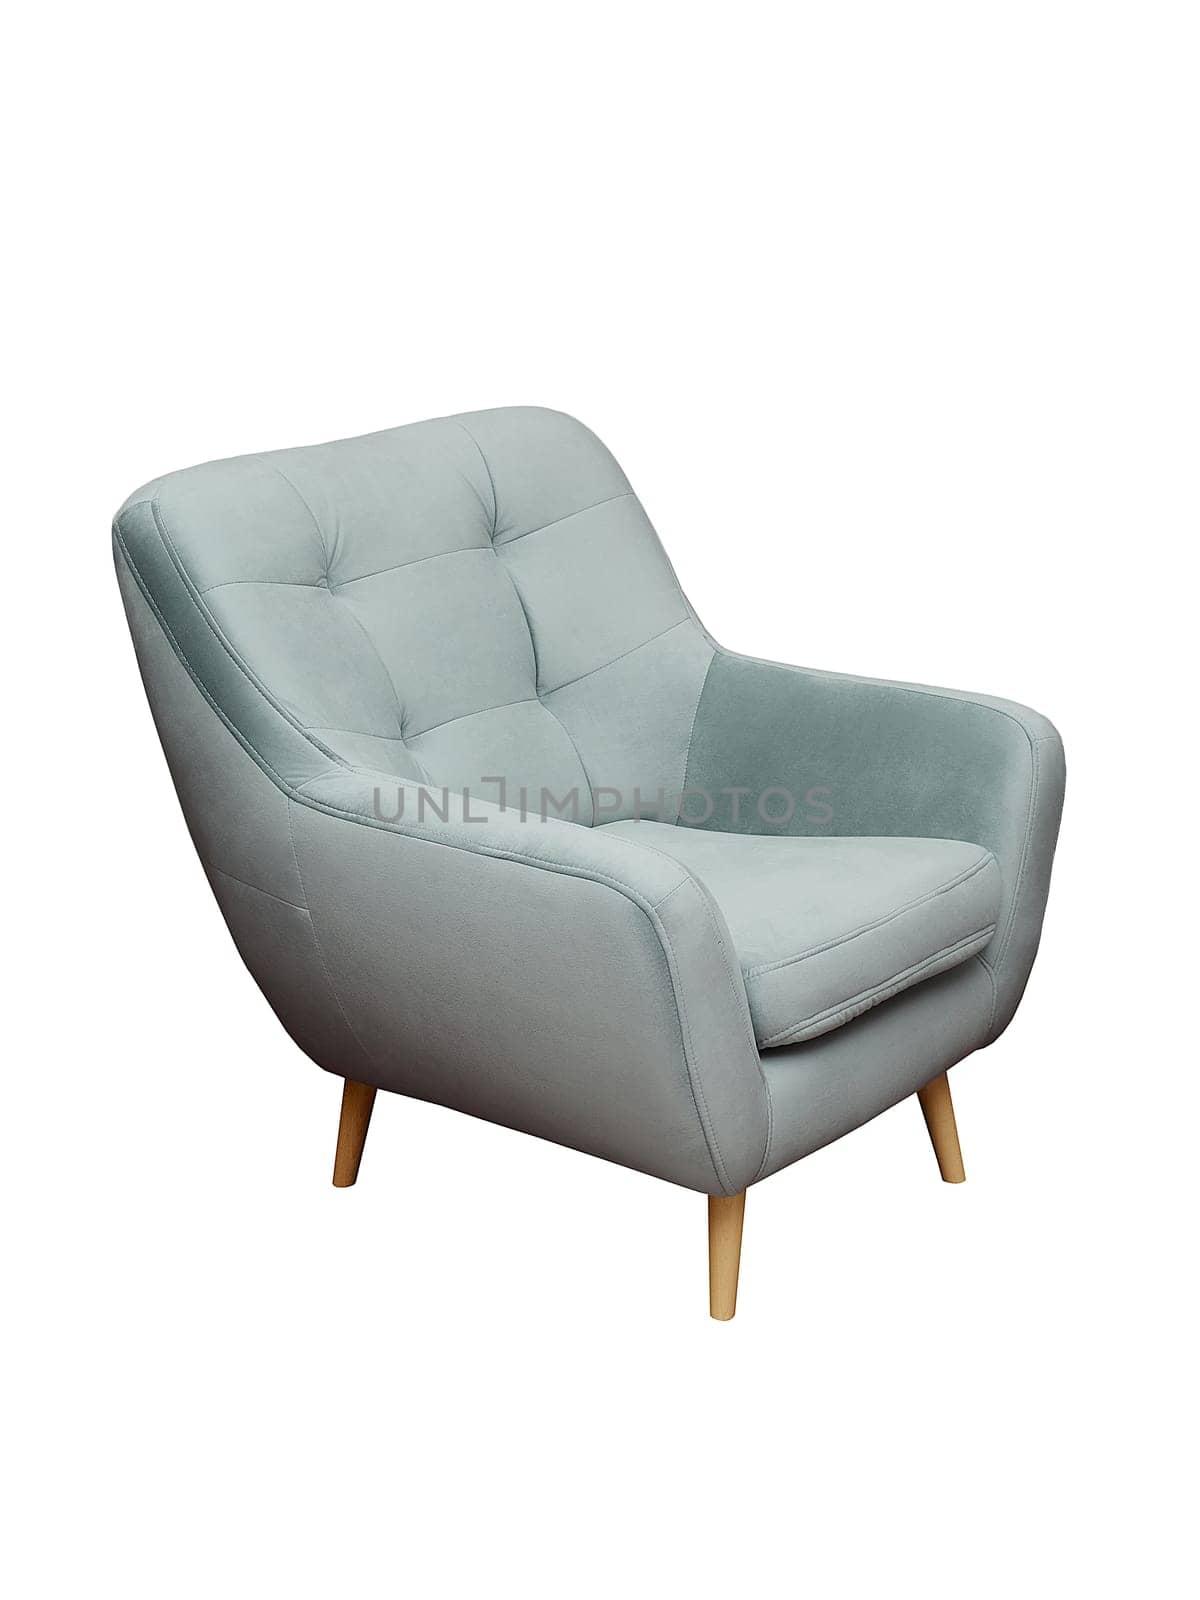 Modern gray fabric armchair with wooden legs isolated on white background, side view. furniture, interior, home design in minimal style